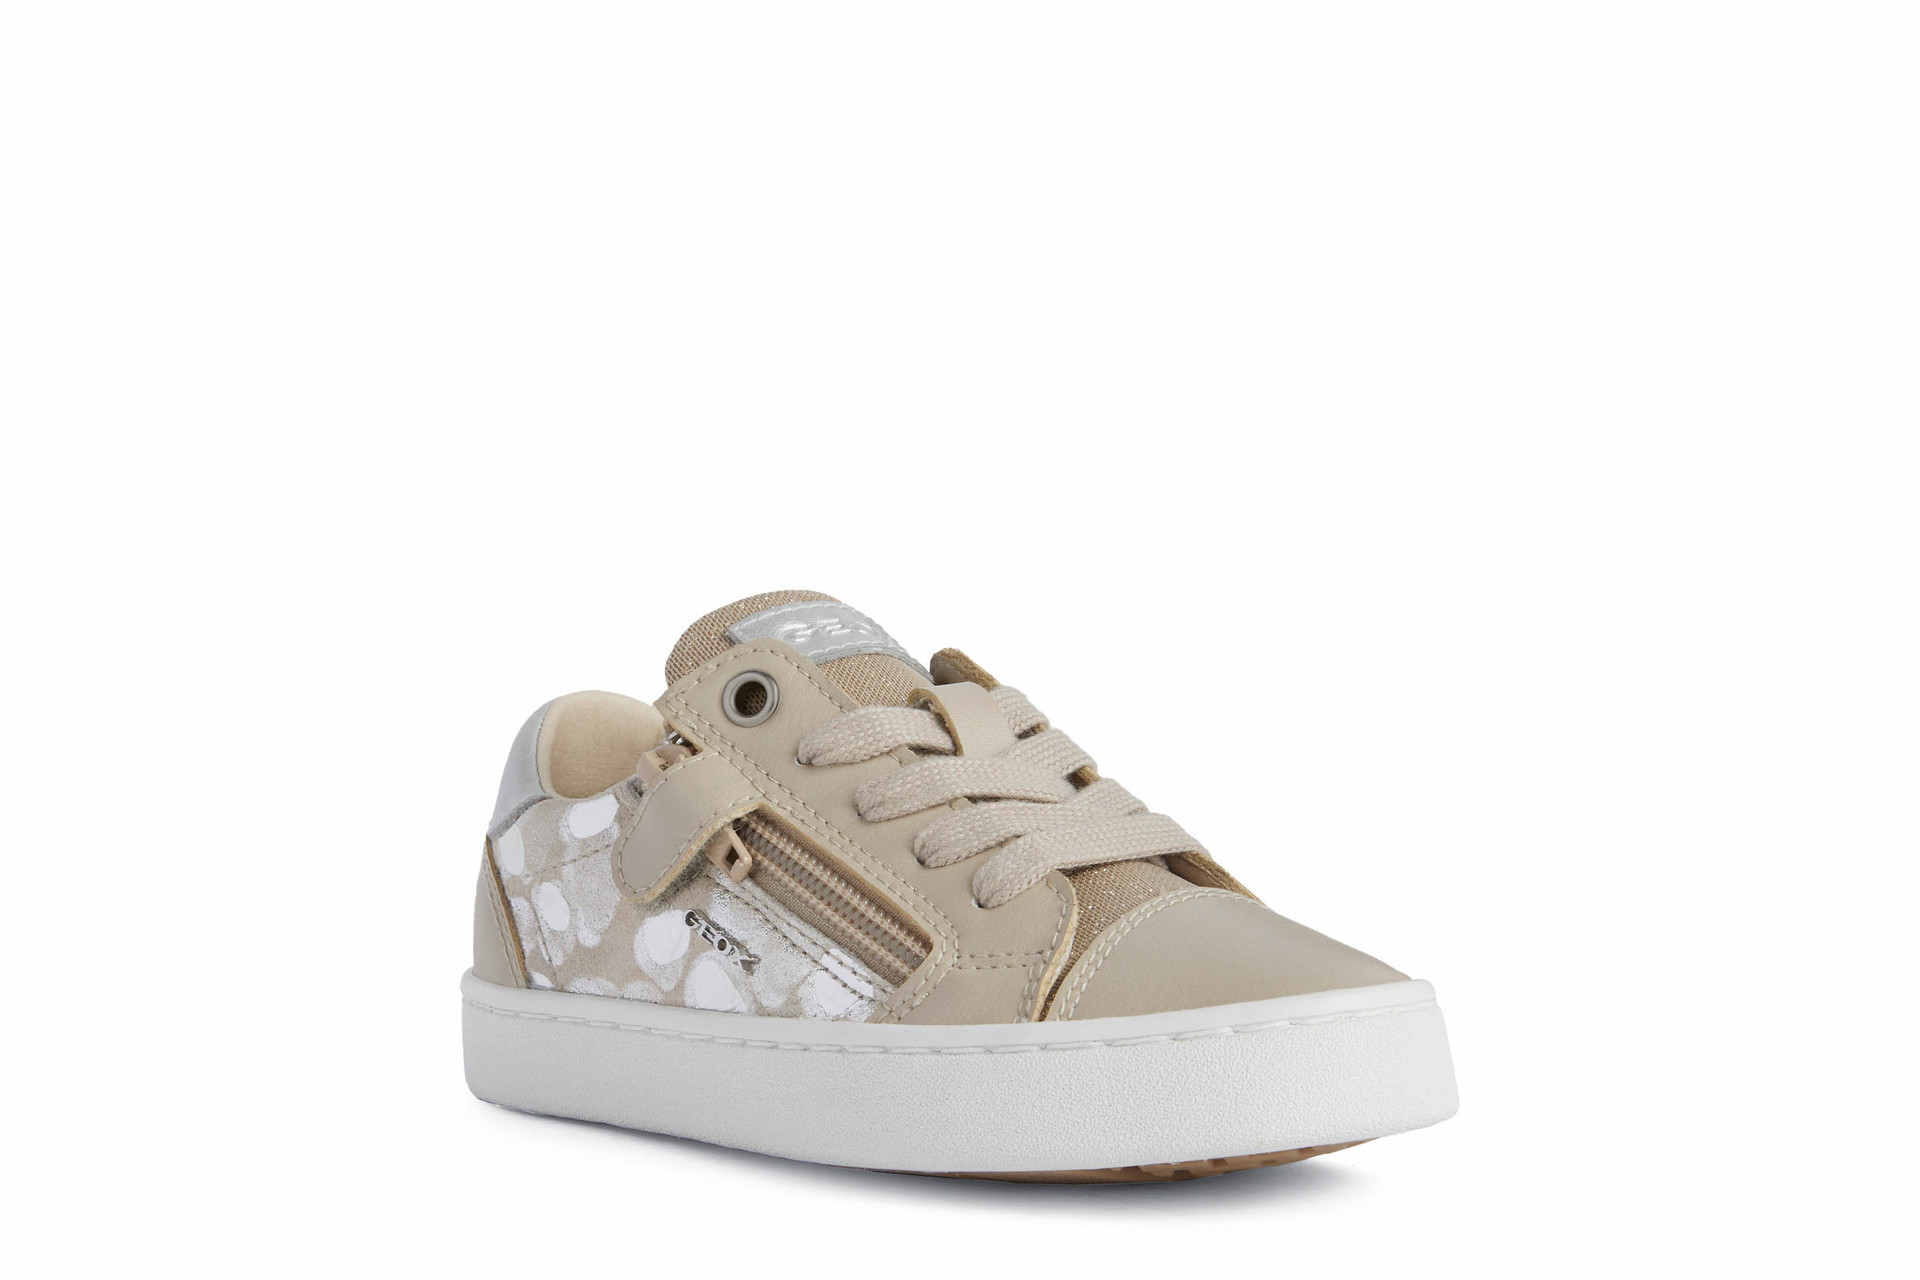 GEOX Kilwi - Beige / Silver Leather/Synthetic